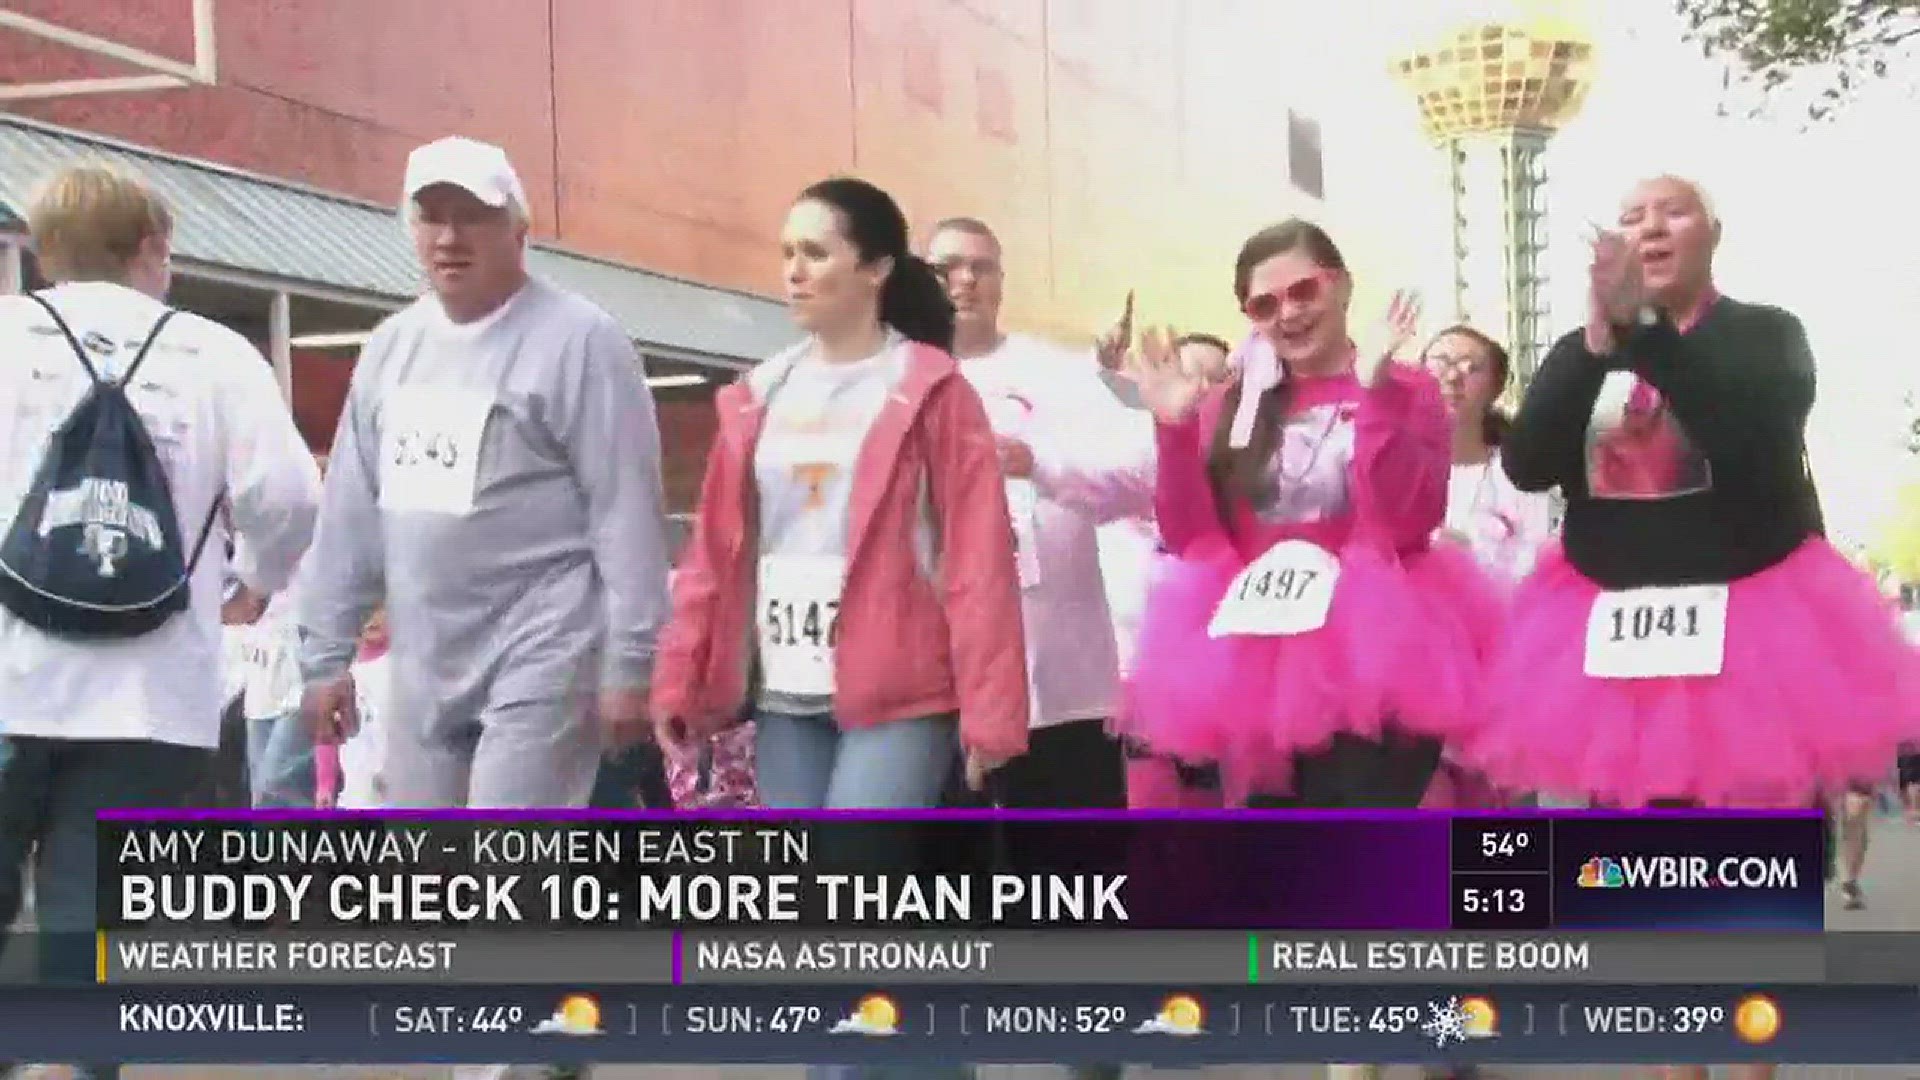 Last fall, Susan G. Komen introduced a new initiative. For decades, people have associated the color pink with breast cancer. Now, the national organization is asking people to "be more than pink."